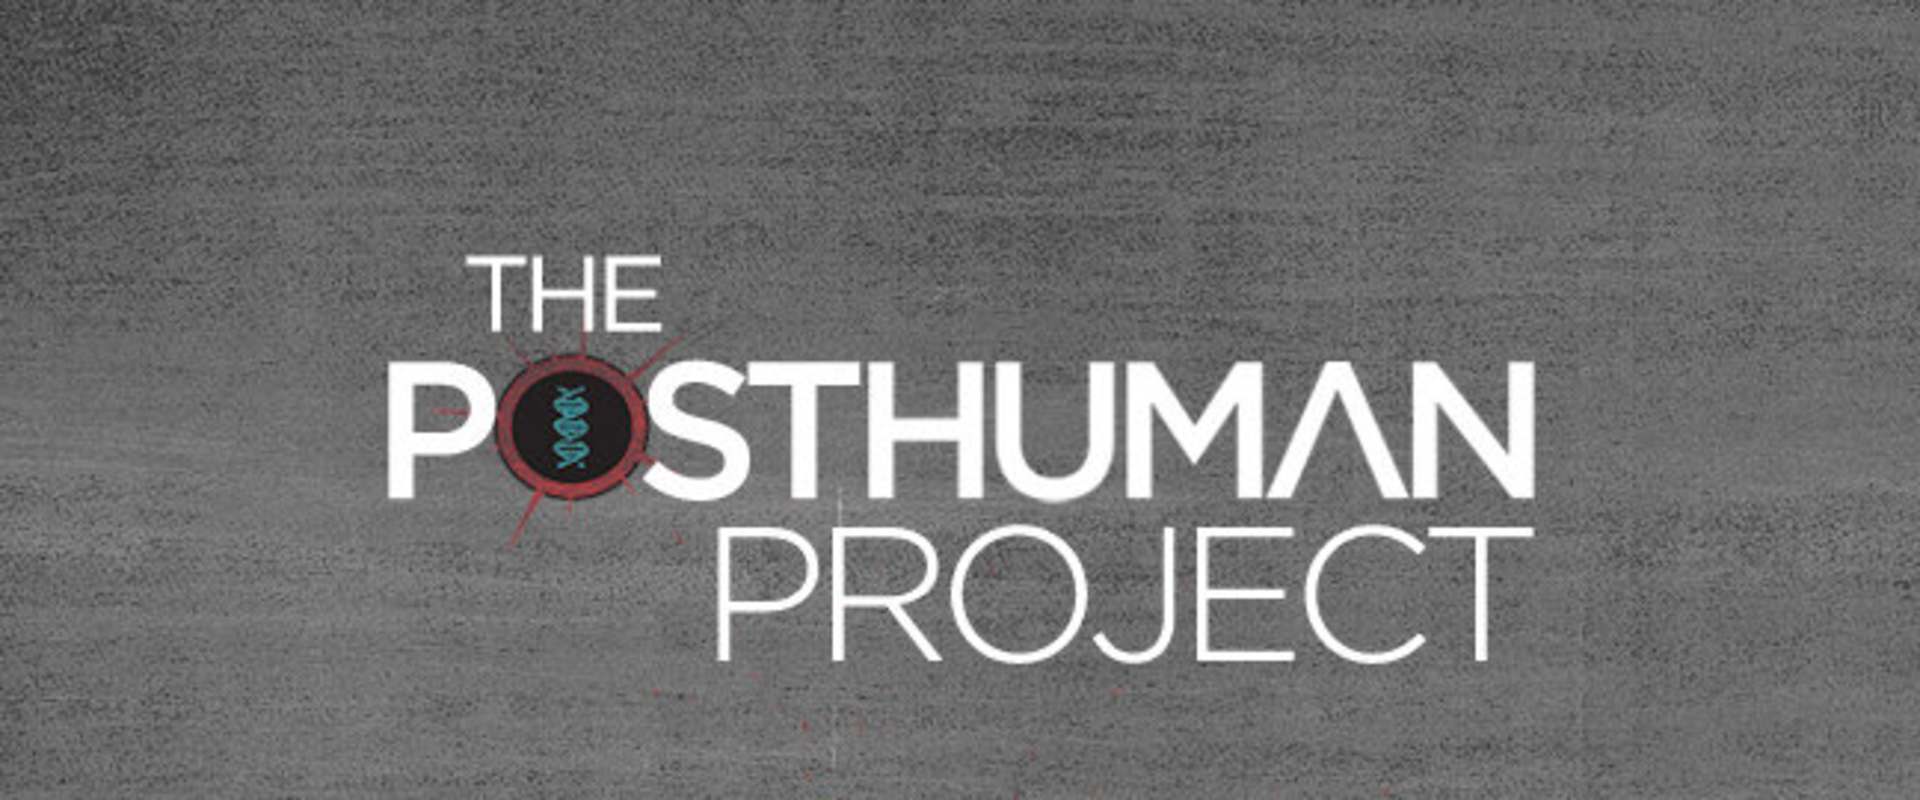 The Posthuman Project background 1